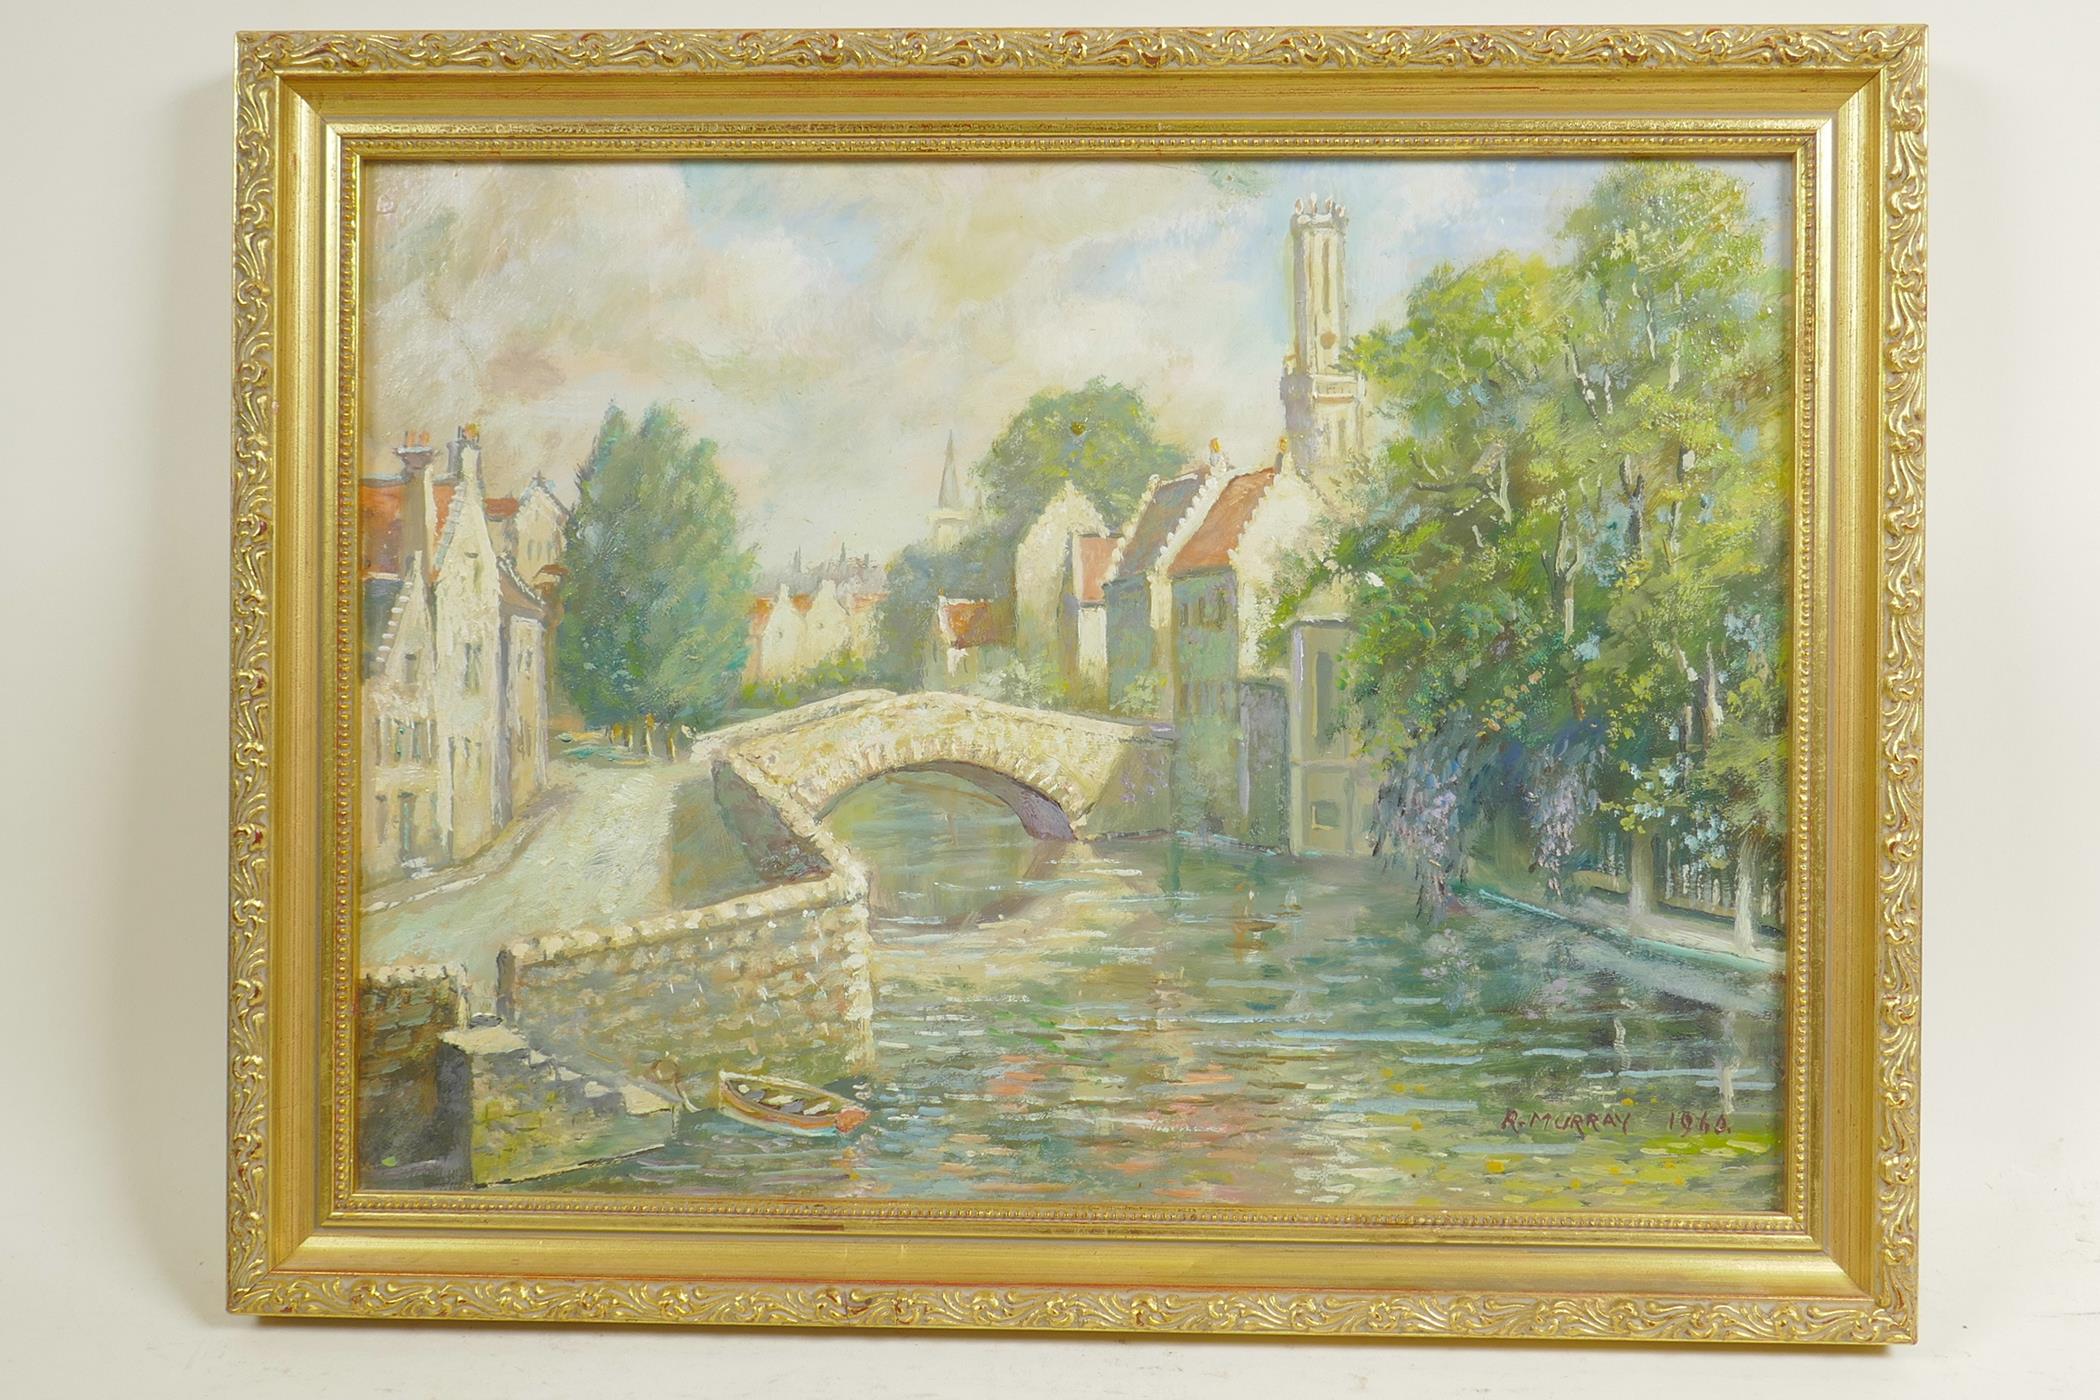 Robert Murray, river and town scene with stone bridge, signed and dated 1960, oil on board, 13" x - Image 3 of 4